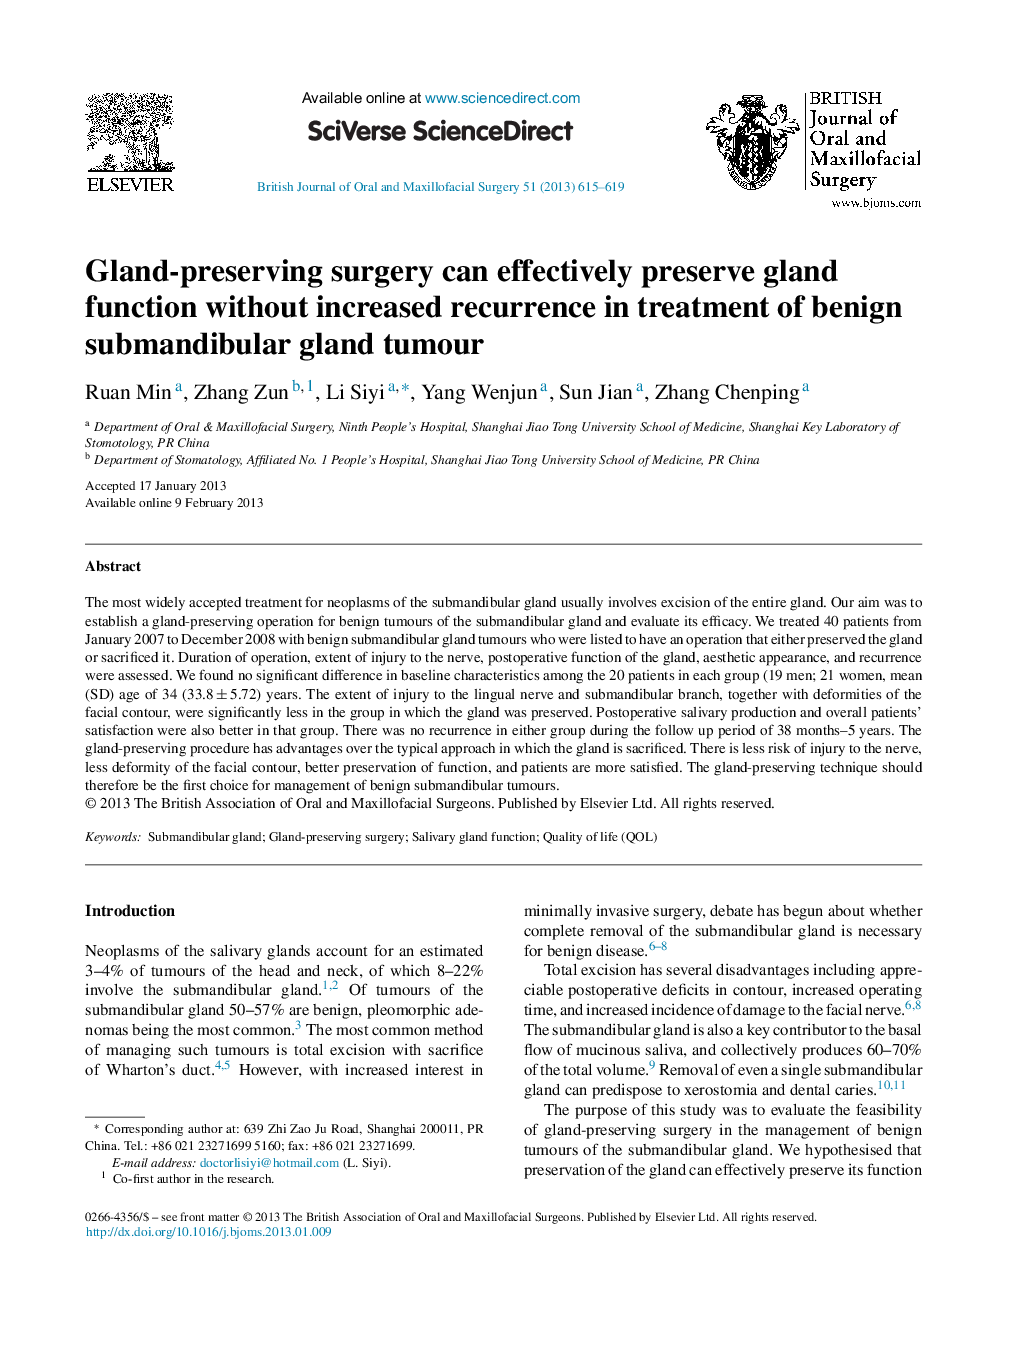 Gland-preserving surgery can effectively preserve gland function without increased recurrence in treatment of benign submandibular gland tumour